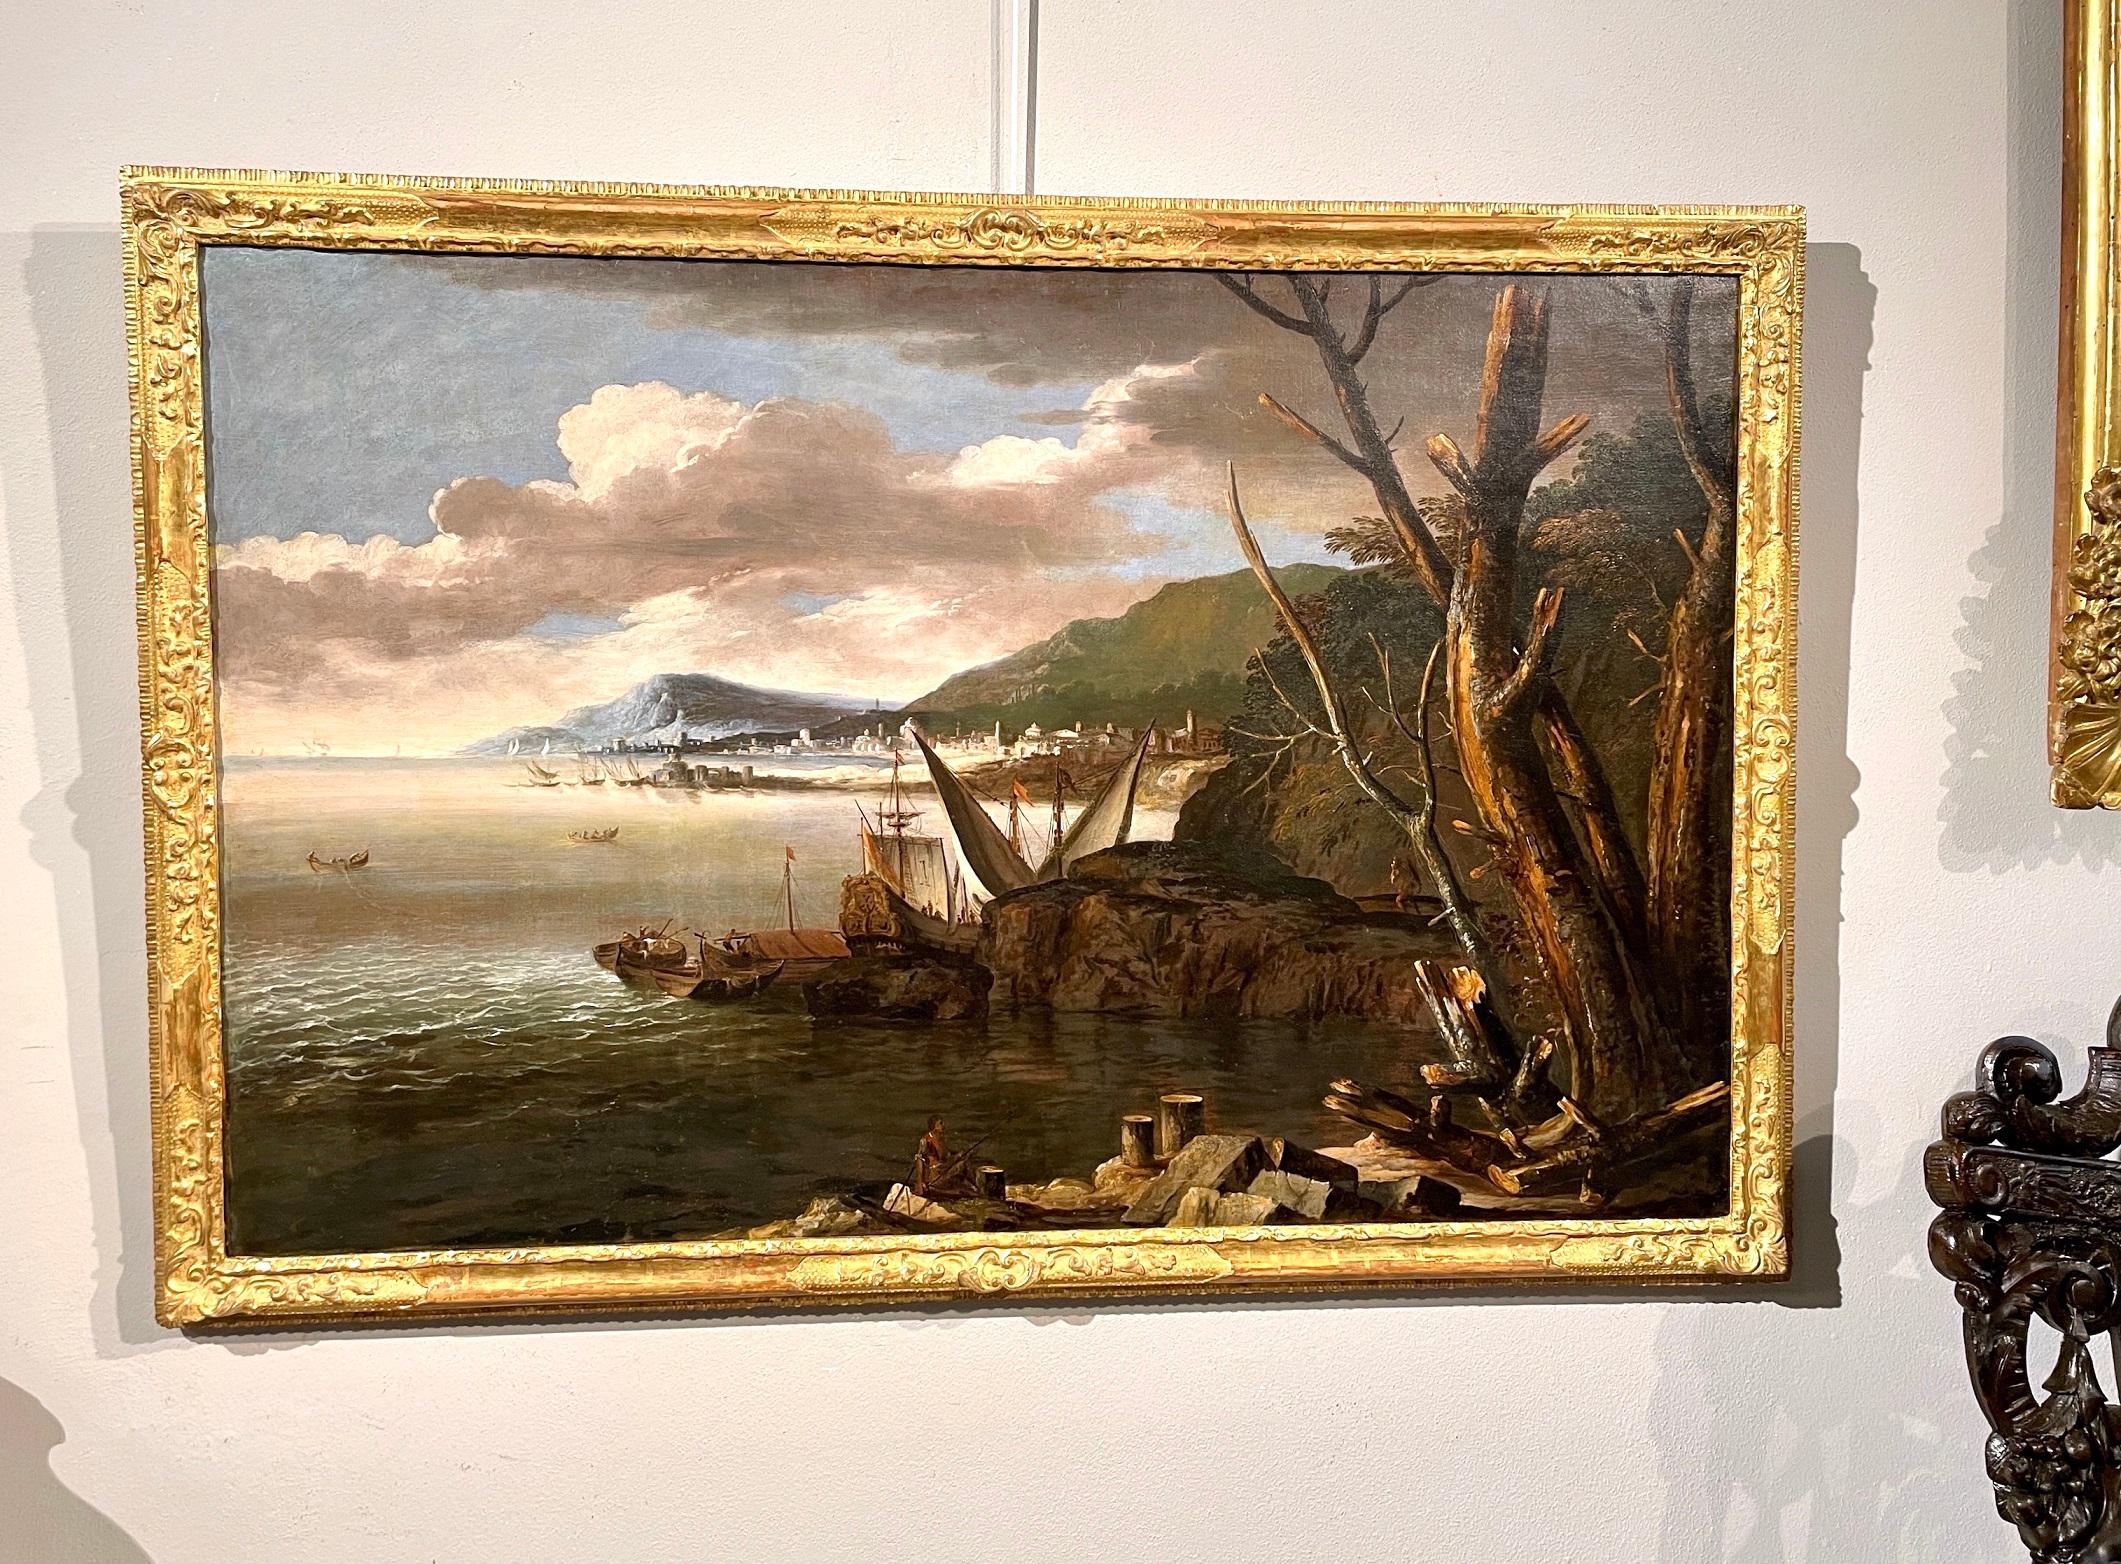 Ricci View Coastal Landscape Paint Oil on canvas Old master 17/18th Century Art For Sale 2